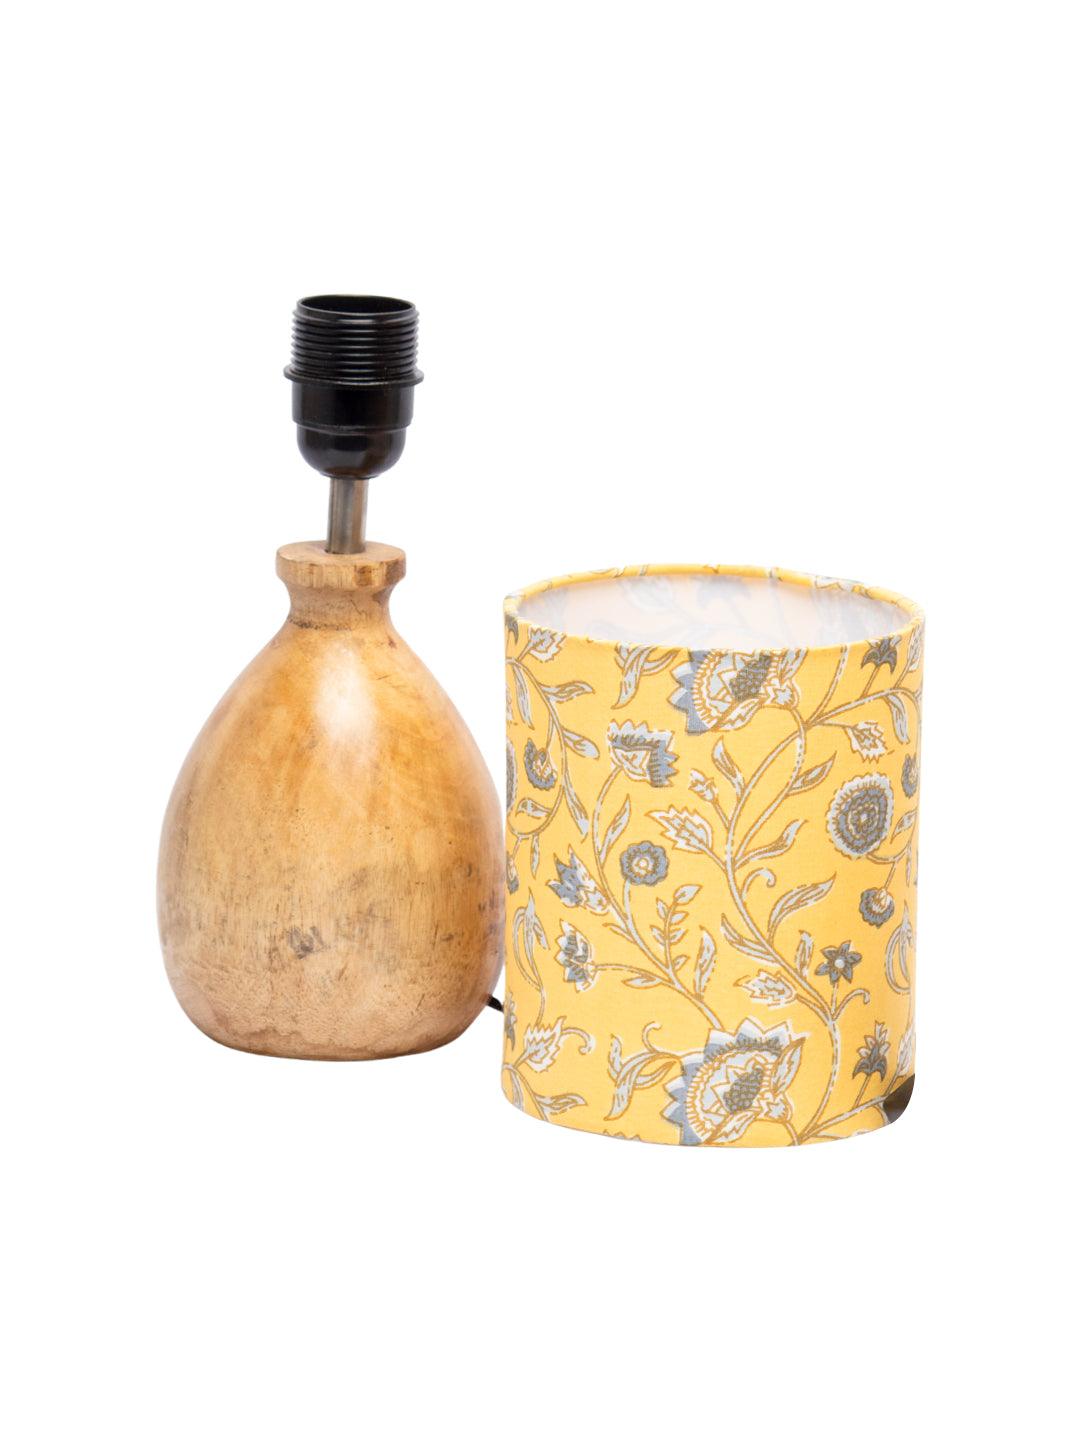 Wooden Table Lamp With Yellow Floral Shade - MARKET 99